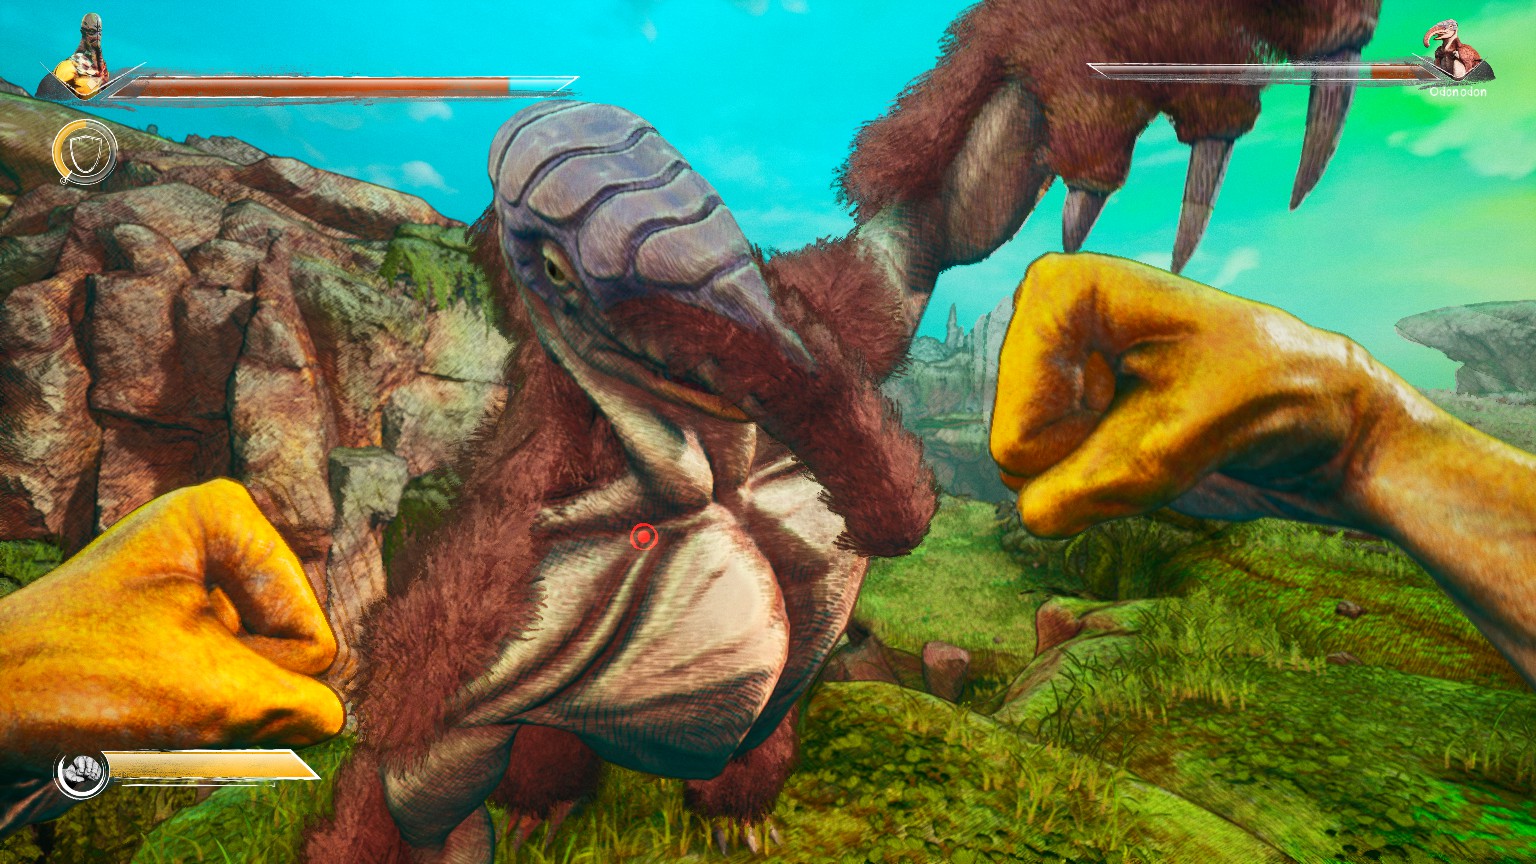 First-person combat with a strange monster in Clash: Artifacts of Chaos.